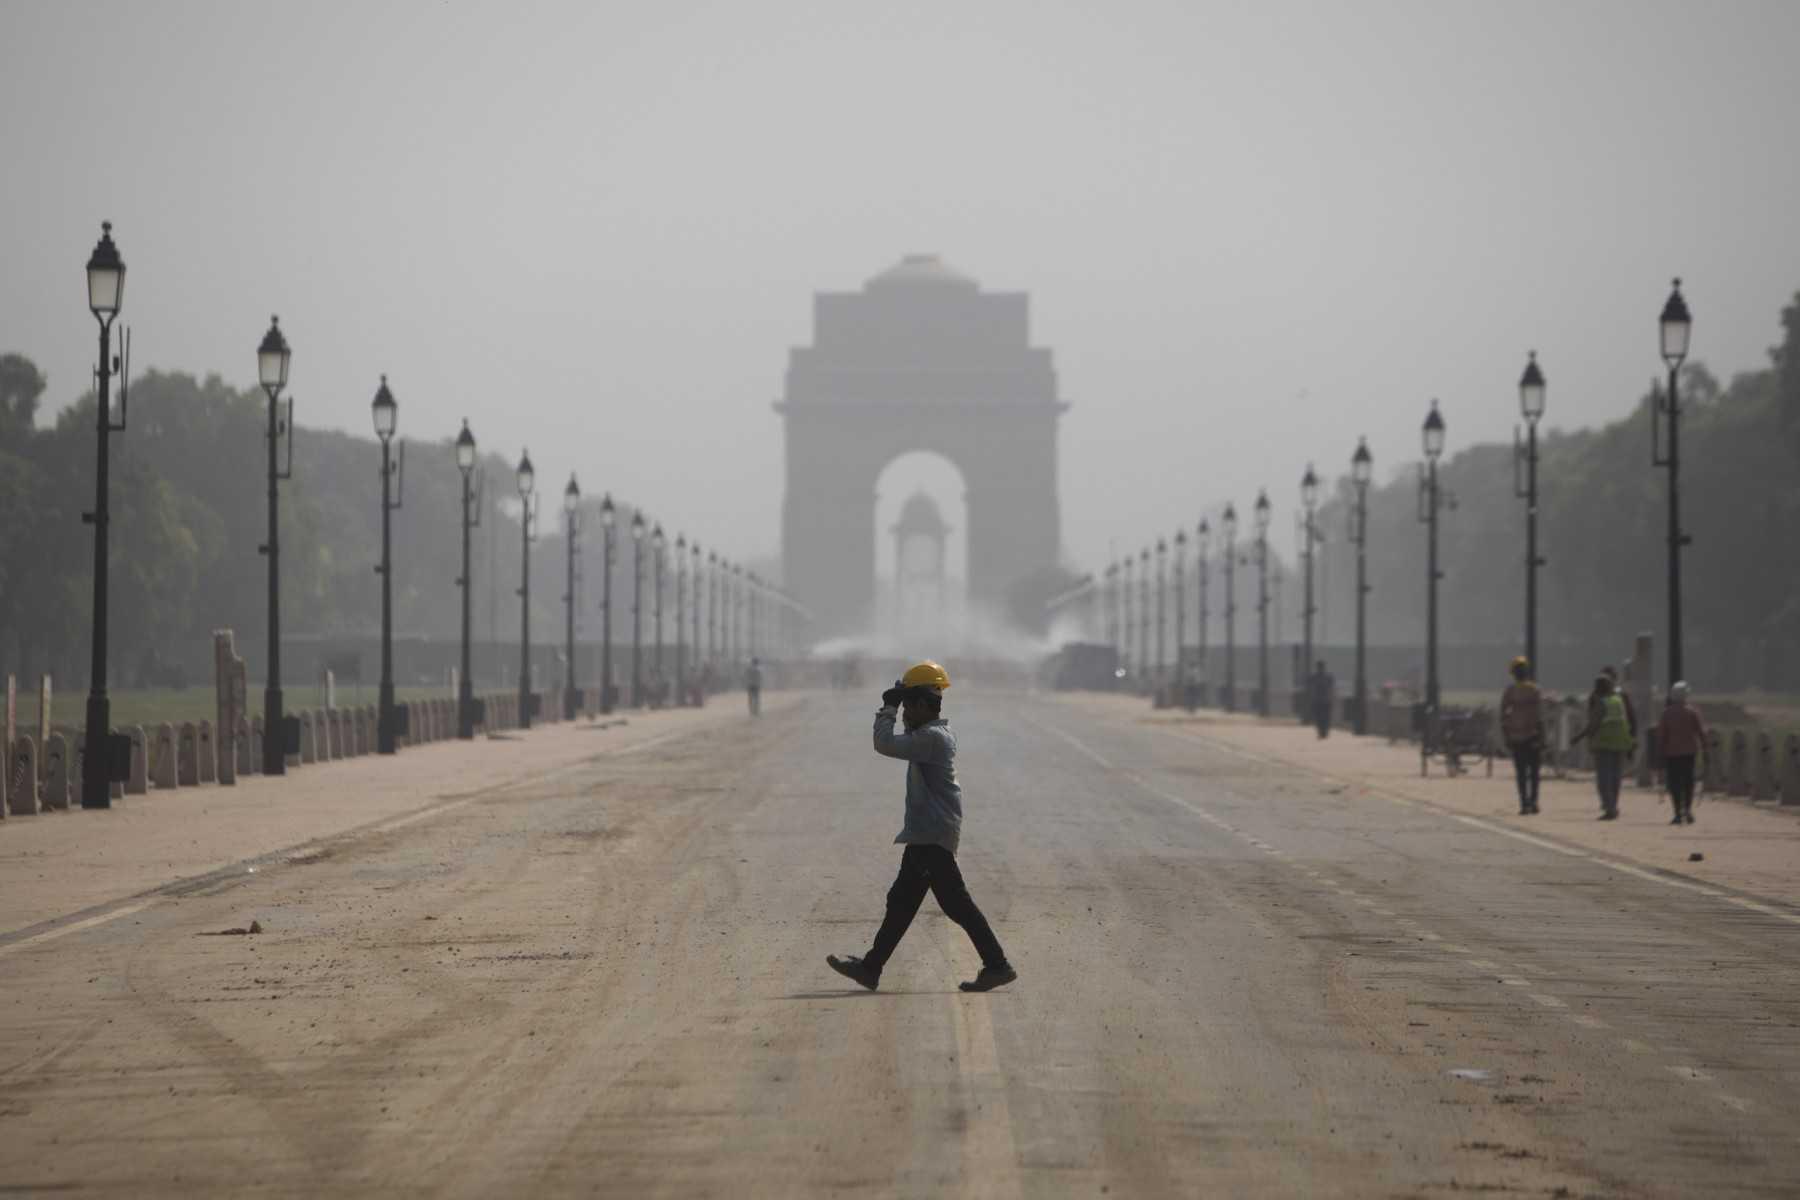 A construction worker walks across the under construction Rajpath, with Inda Gate seen in the background, in New Delhi on March 31. Photo: AFP 